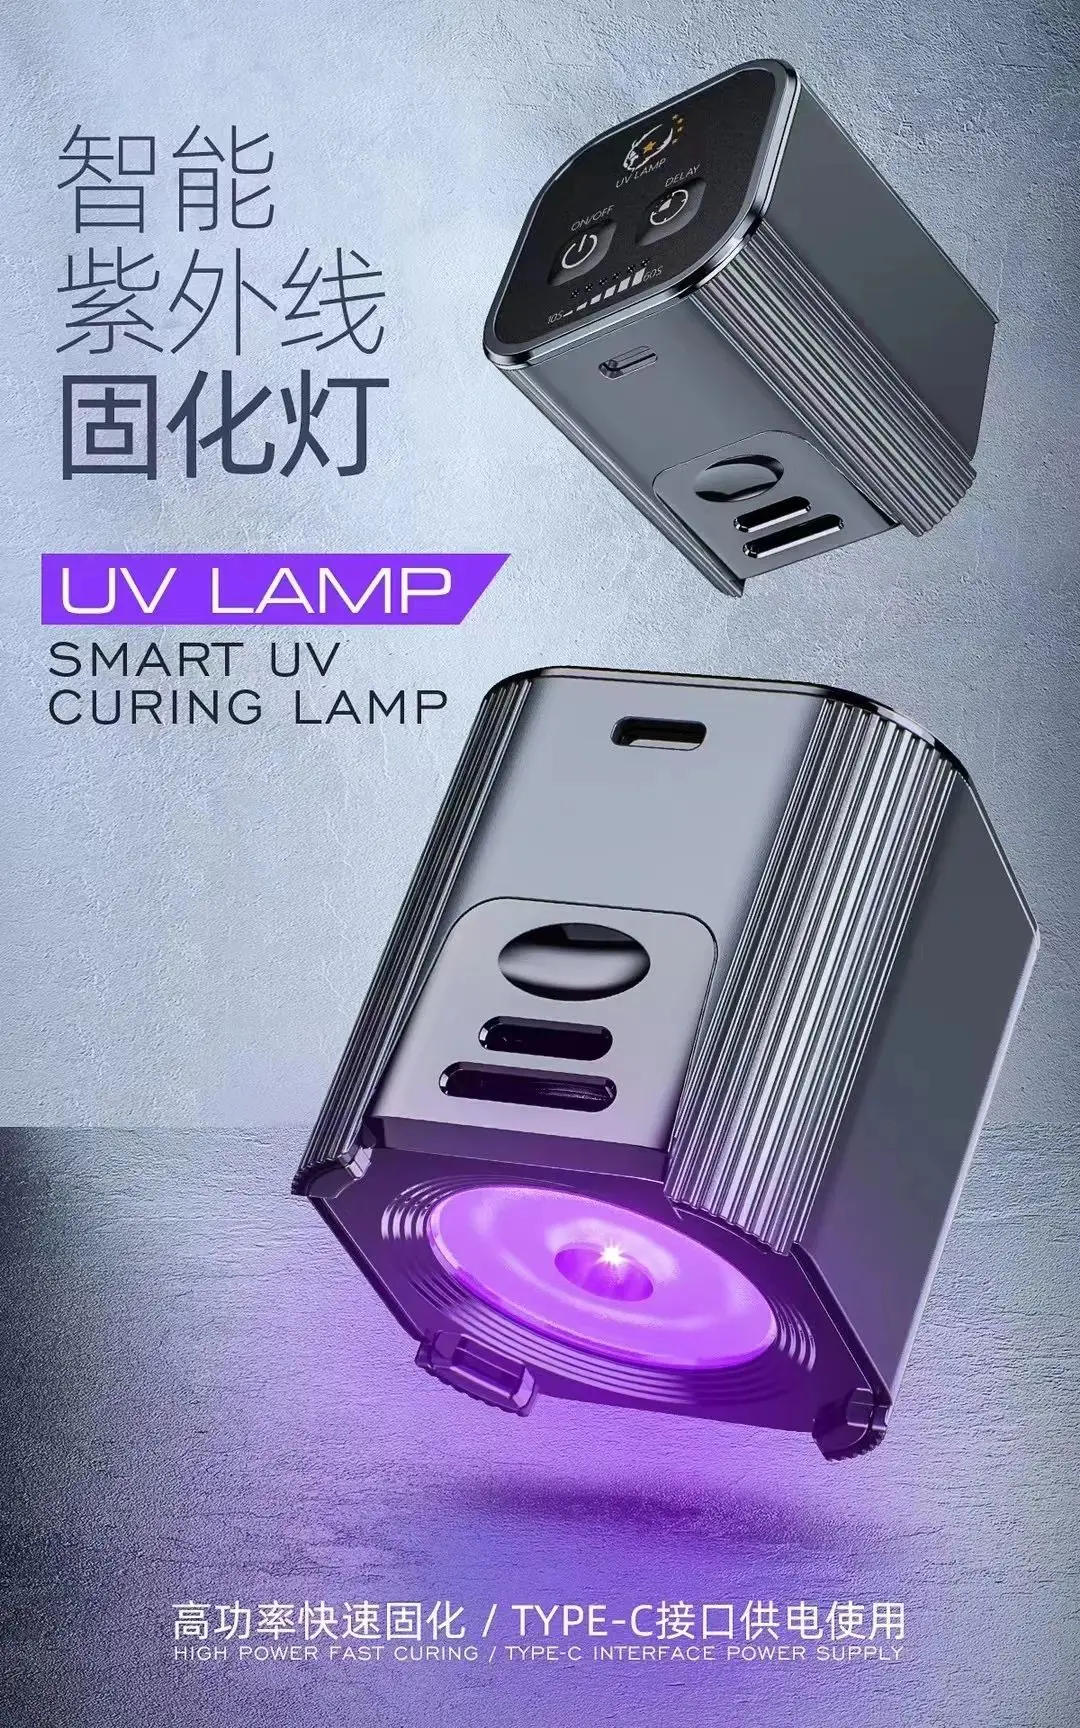 

UV Curing Lamp for Green Oil and Glue Curing /Lamp Dryer LED Ultraviolet Light for chips curing /Glue curing Lamp /mobile fix